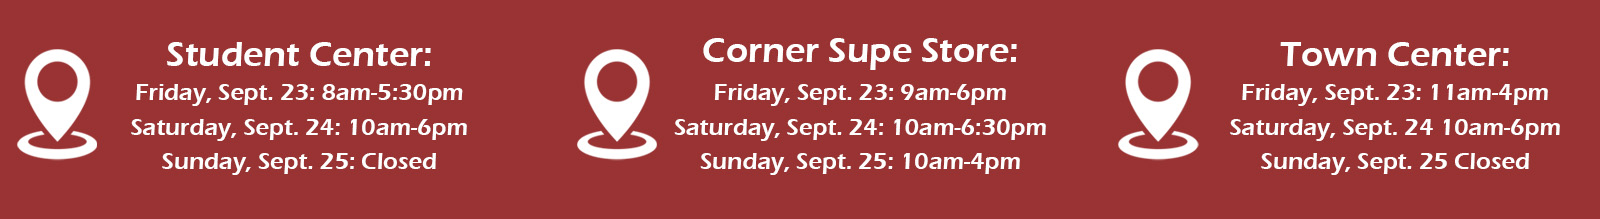 Supe Store weekend hours and locations